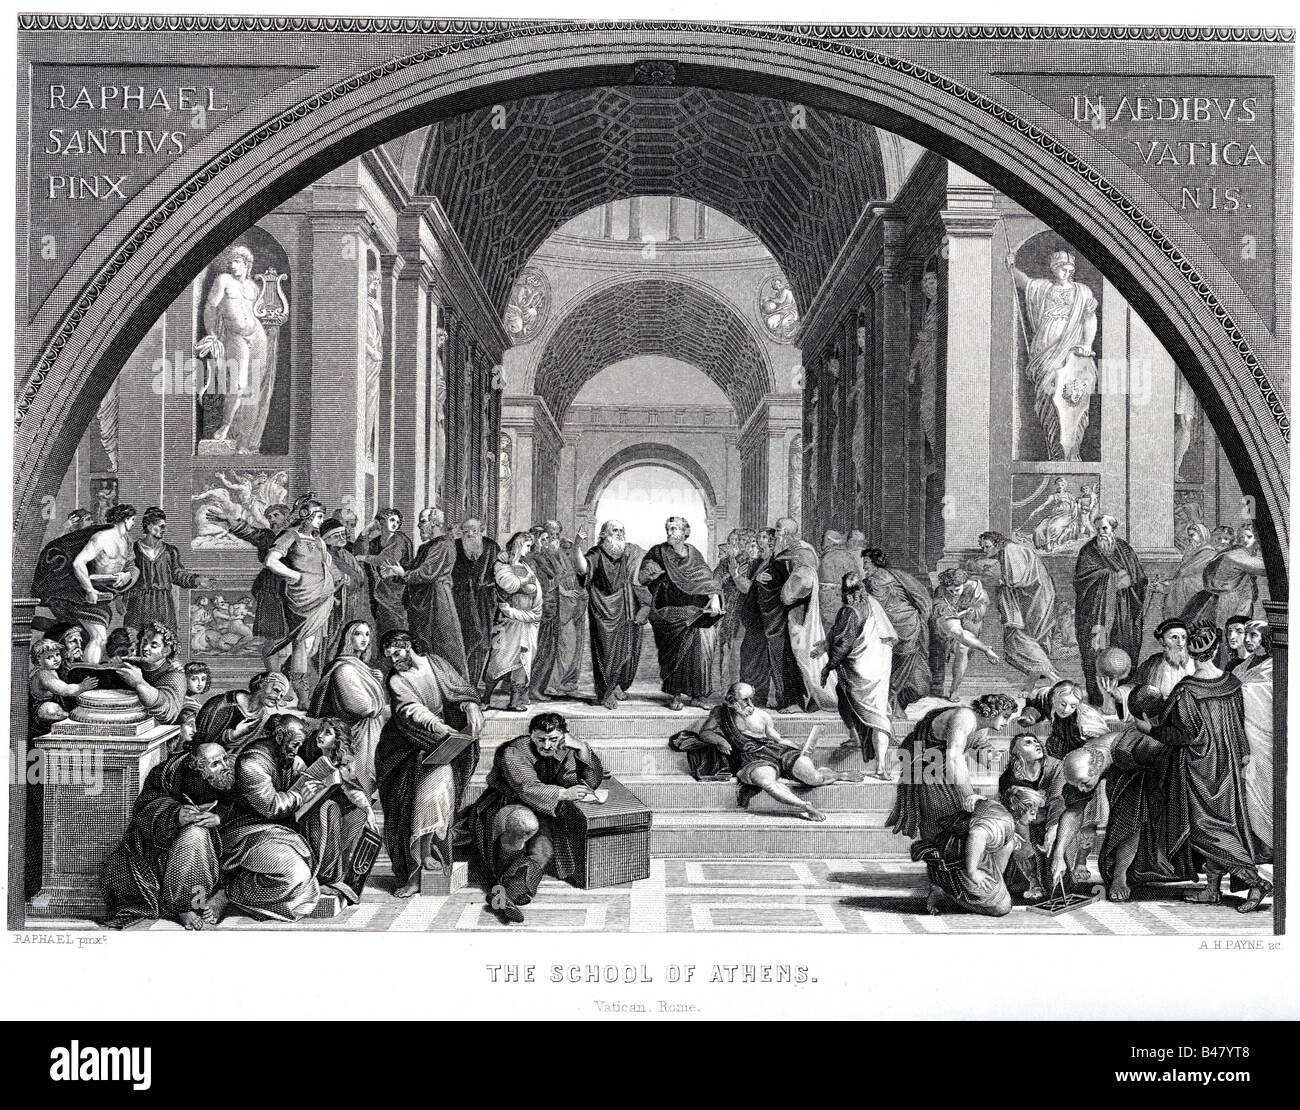 fine arts, Raphael (1483 - 1520), 'The school of Athens', Rome, 1512, steel engraving by Albert Henry Payne, 19th century, , Stock Photo